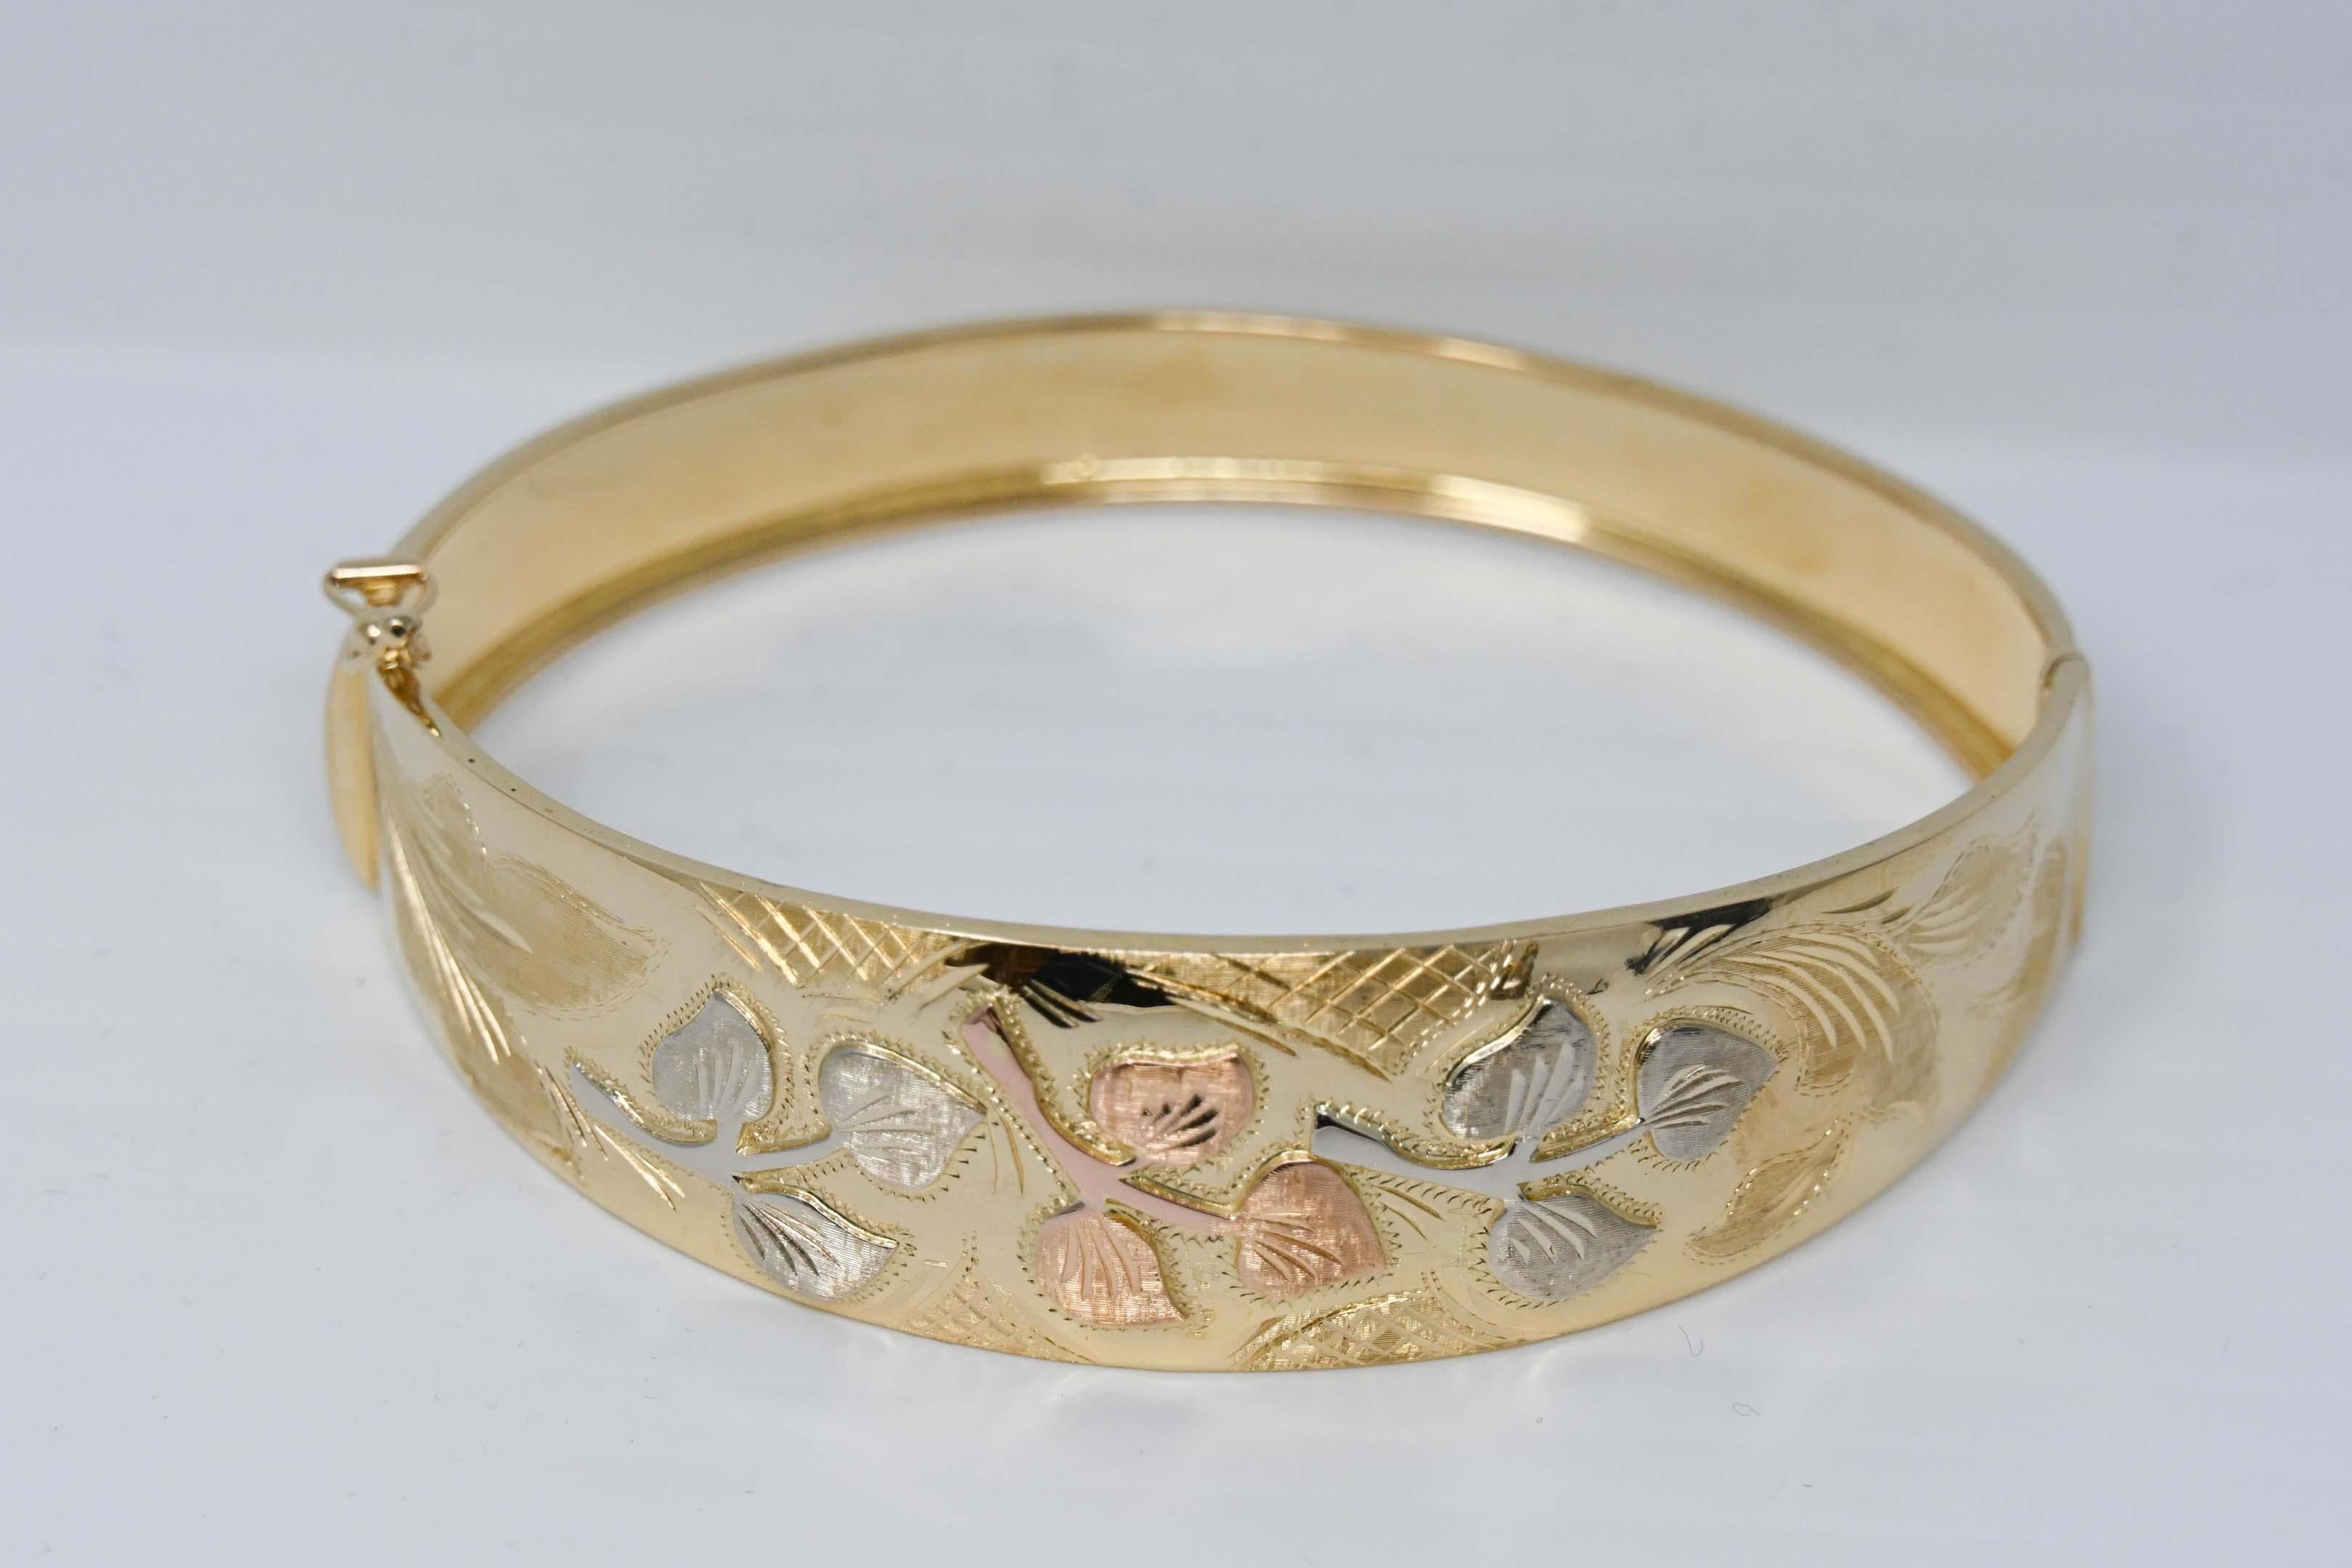 Vintage 18k yellow gold bangle bracelet with leaf design. Made in Italy, stamped 18k and maker mark weighs 31.1. Measures 2 1/2 inches x 3 inches and 7/8 inches wide at the top.
